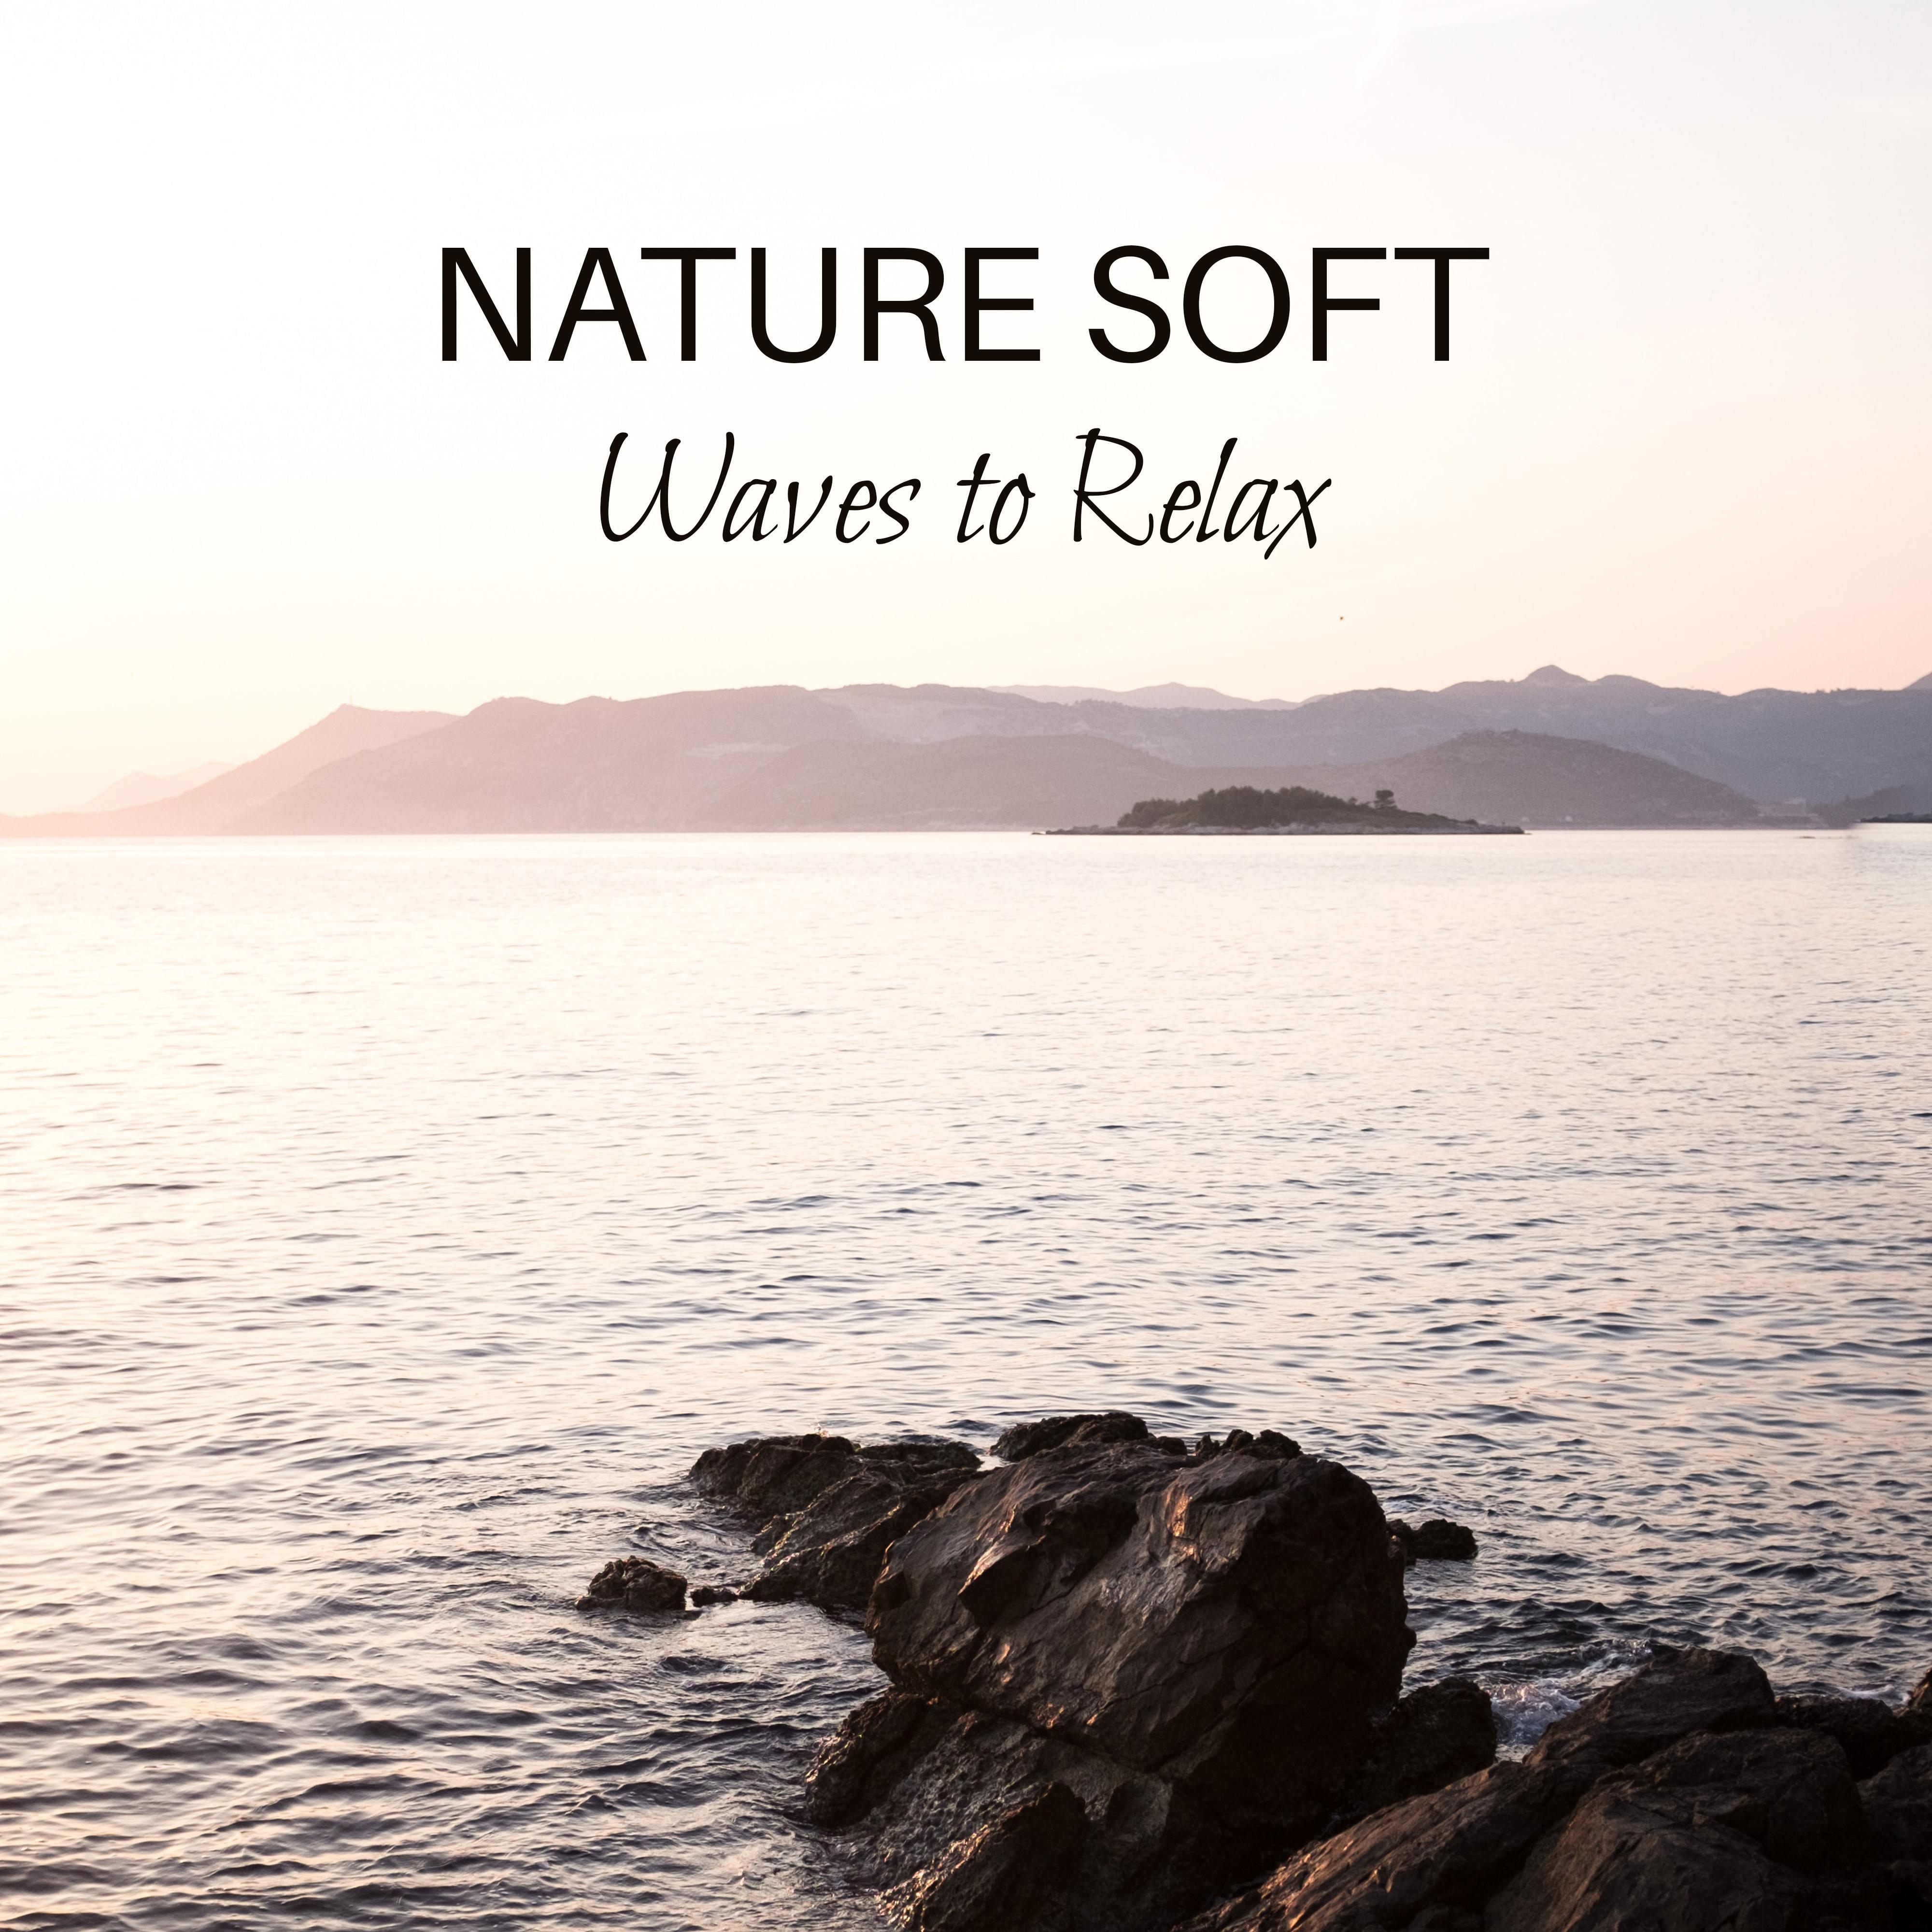 Nature Soft Waves to Relax